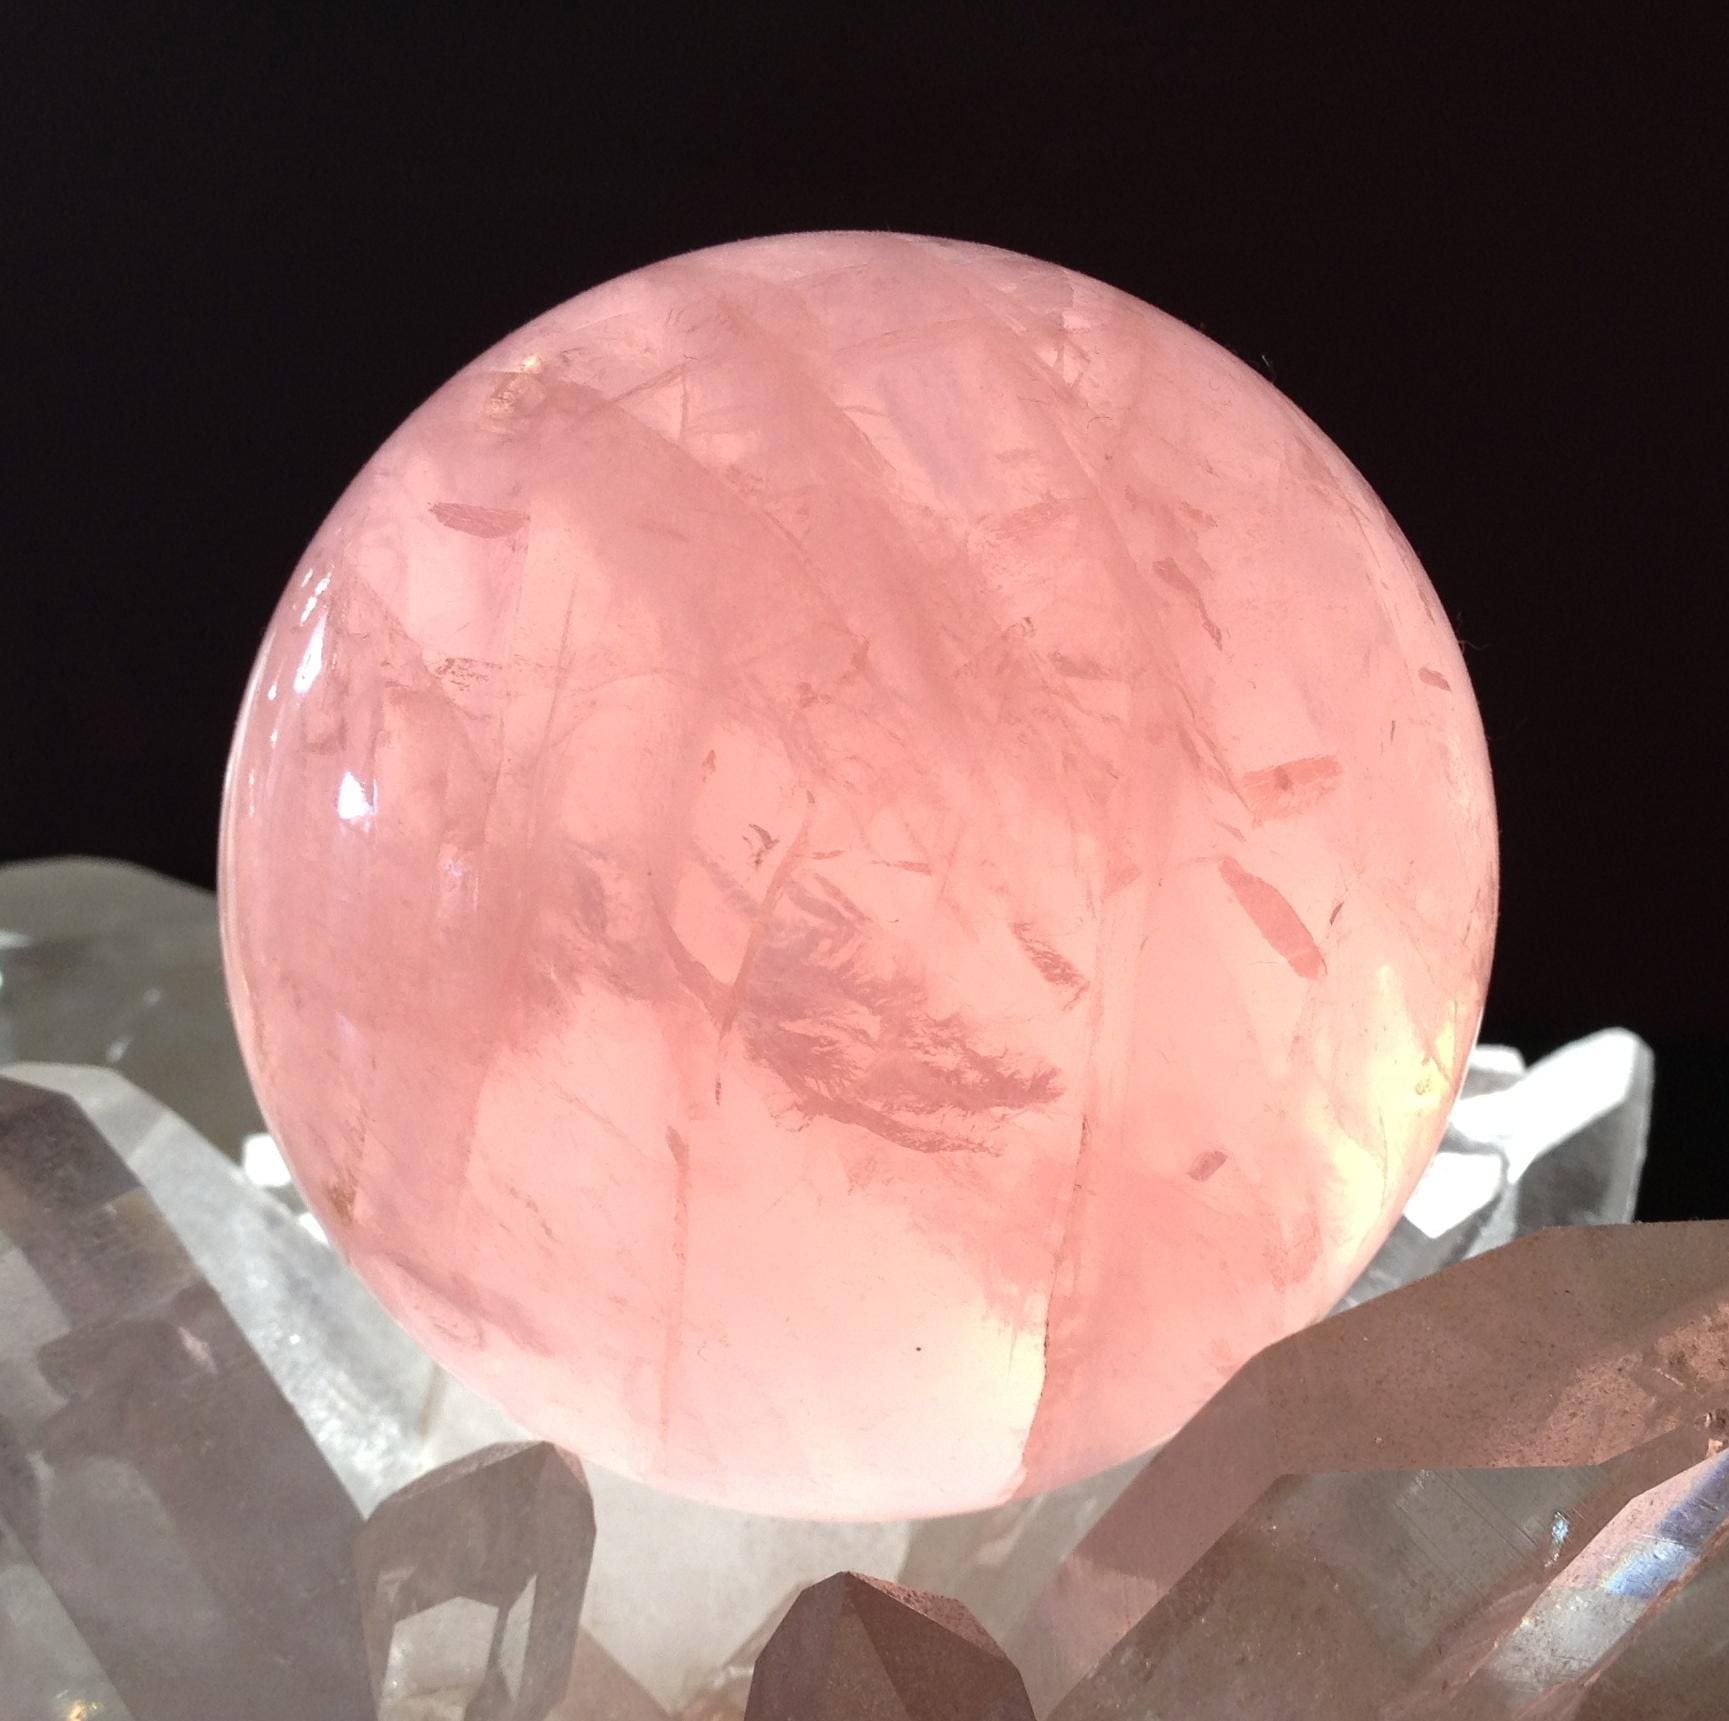 Rose Quartz sphere - the shape and polishing make its inner essence more accessible - than it would be were the chunk left rough